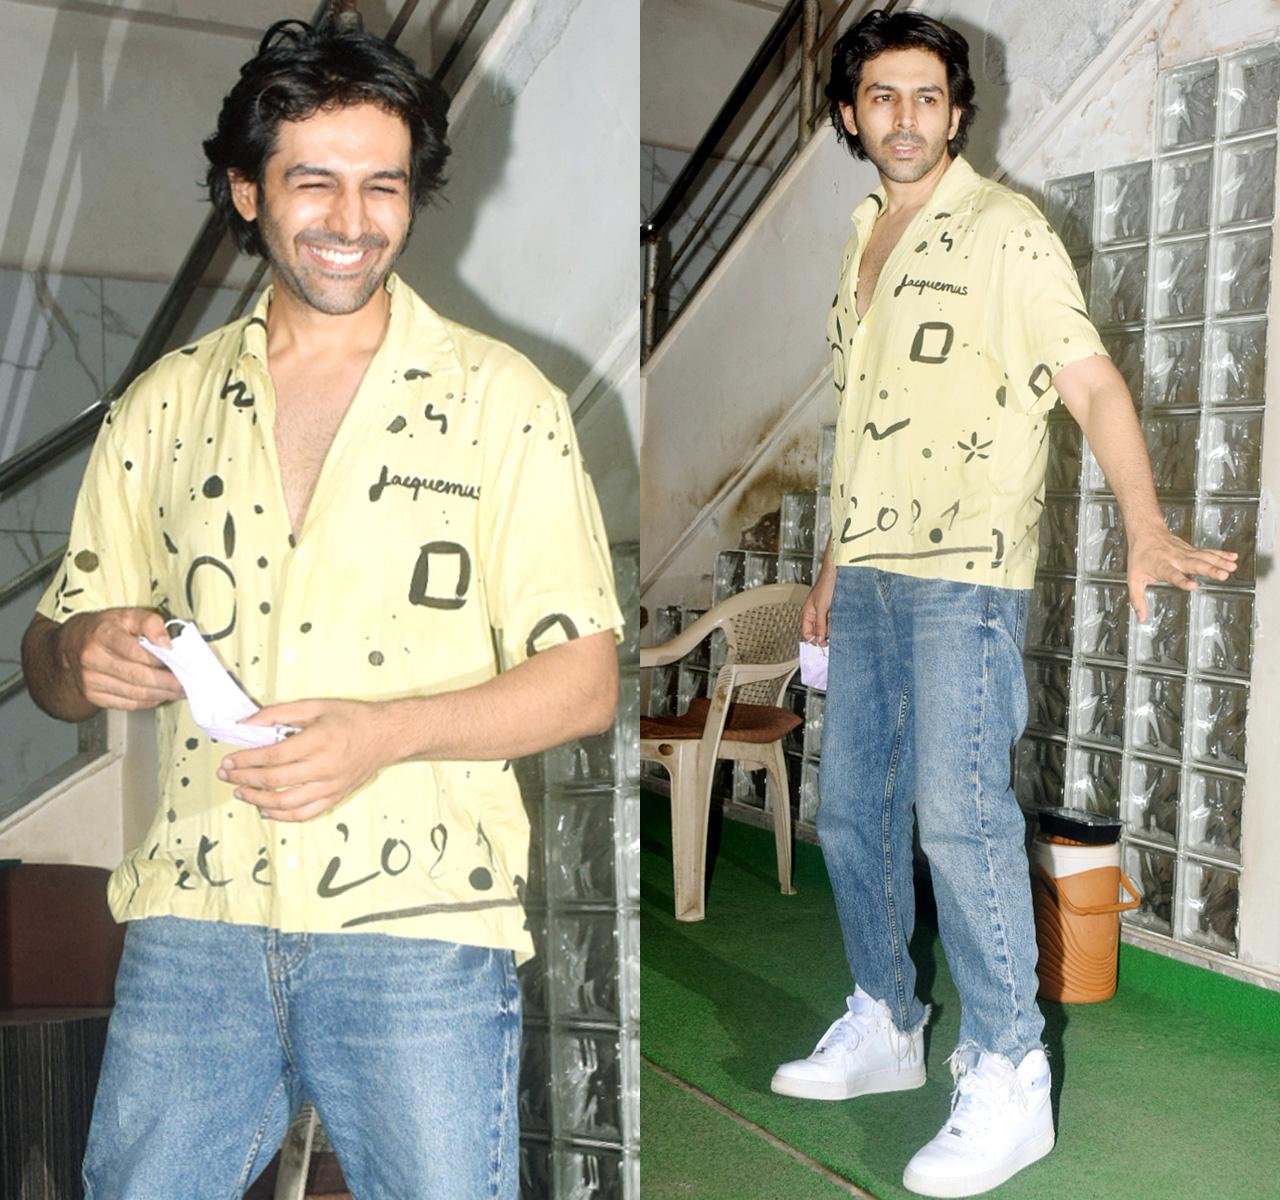 Kartik Aaryan was spotted in Andheri, Mumbai. The actor, dressed in a casual yellow shirt, paired with blue jeans and white shoes, was all smiles for the paparazzi.